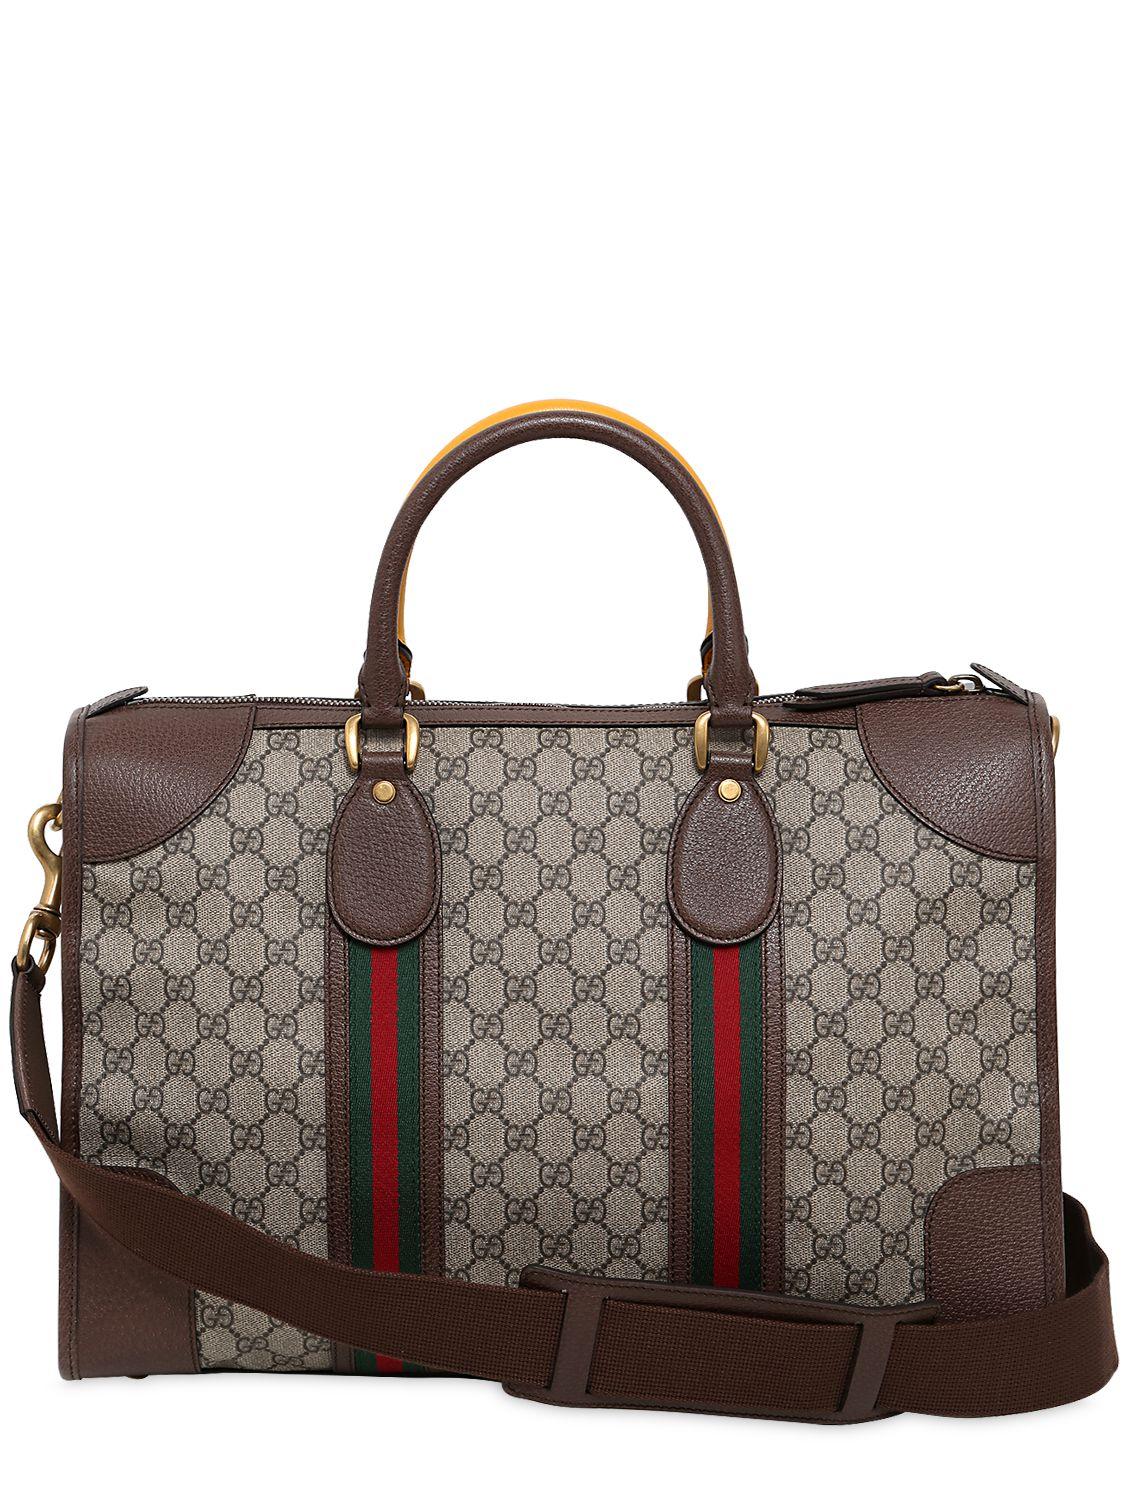 Lyst - Gucci Gg Supreme & Leather Small Duffle Bag in Brown